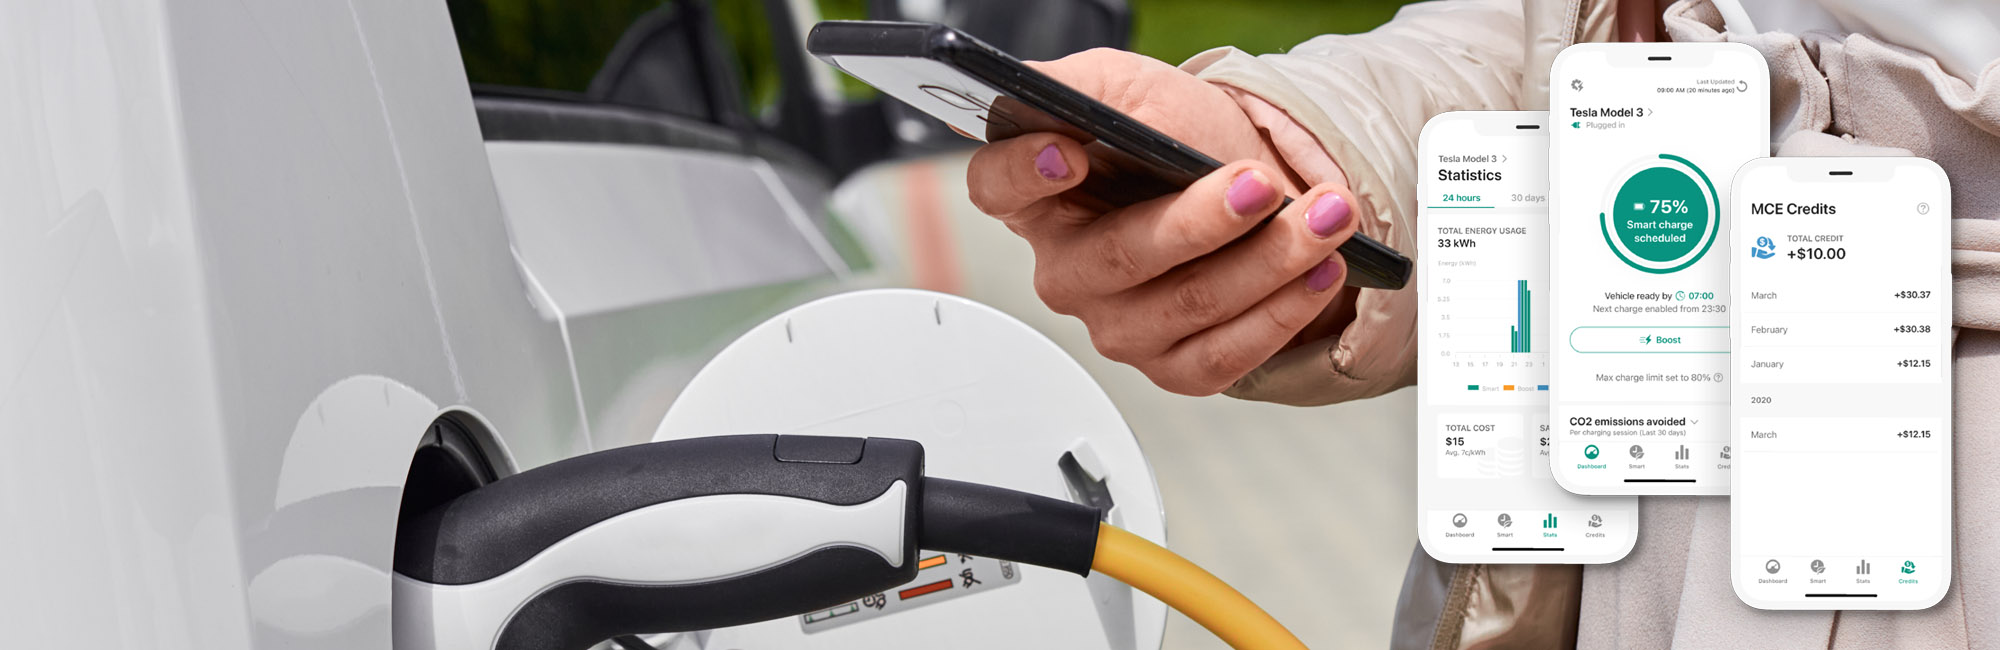 Charged EVs  EV charger connectivity: The benefits of 4G cellular  connectivity - Charged EVs